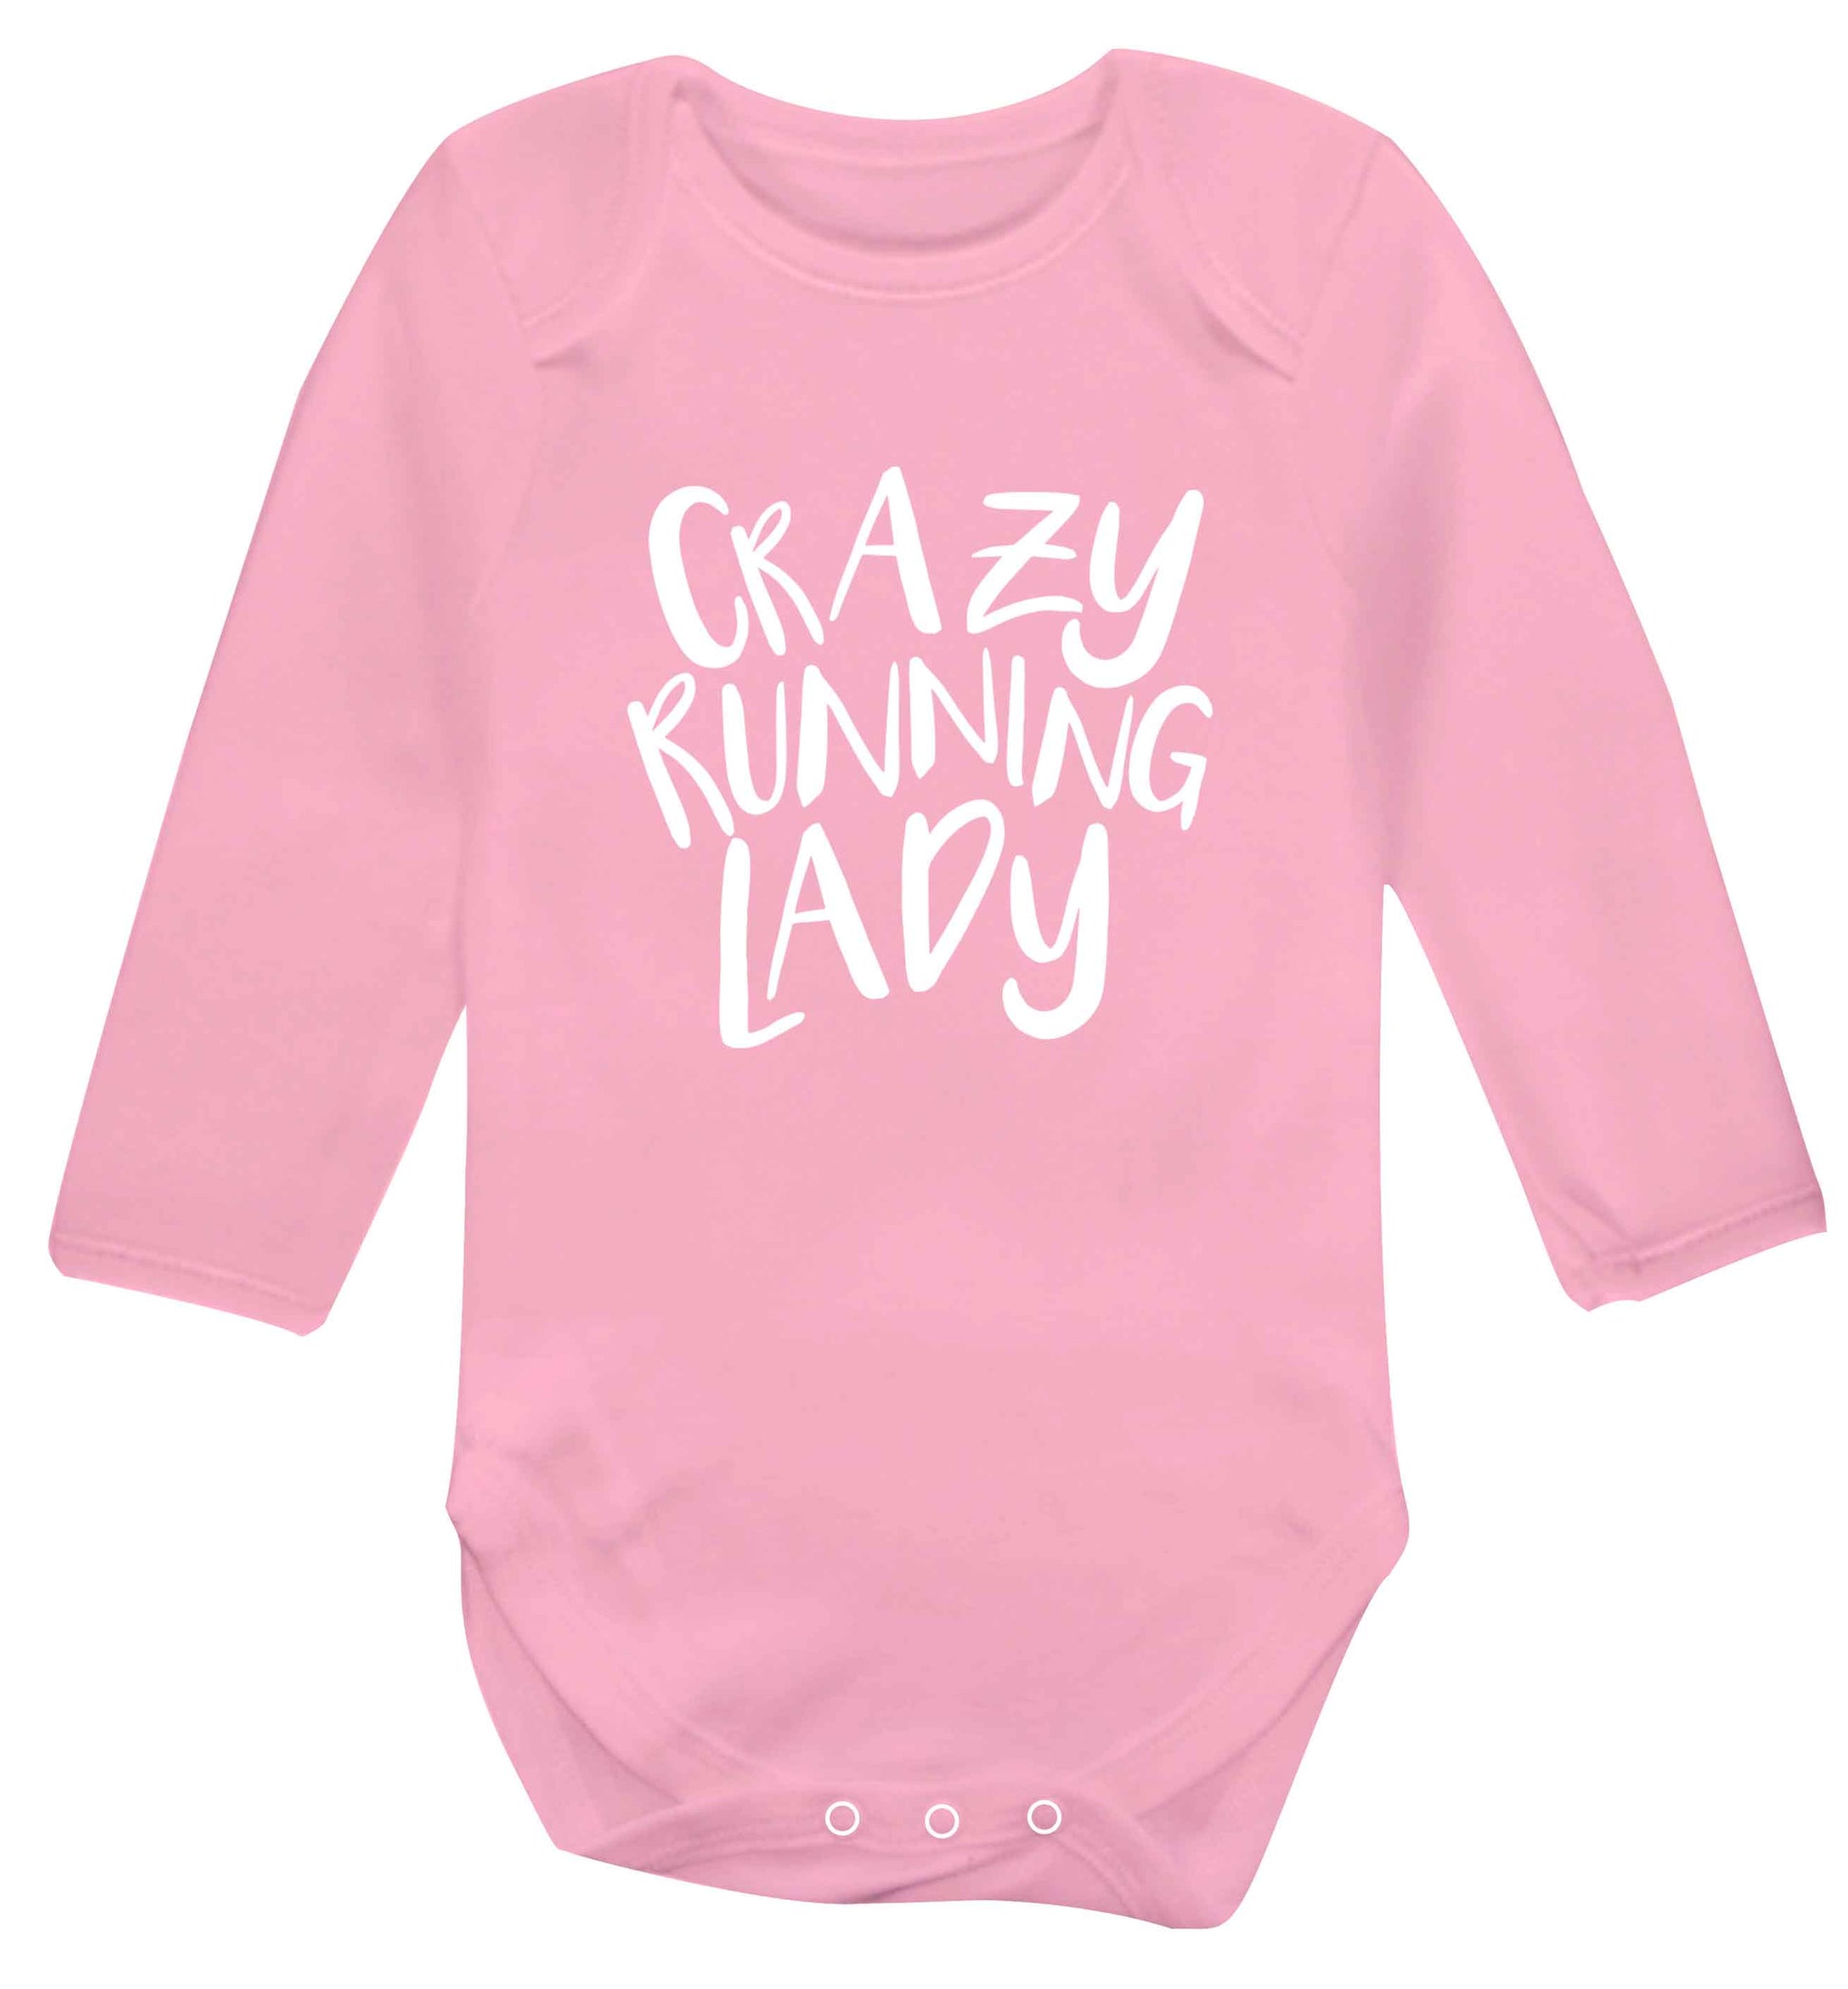 Crazy running lady baby vest long sleeved pale pink 6-12 months